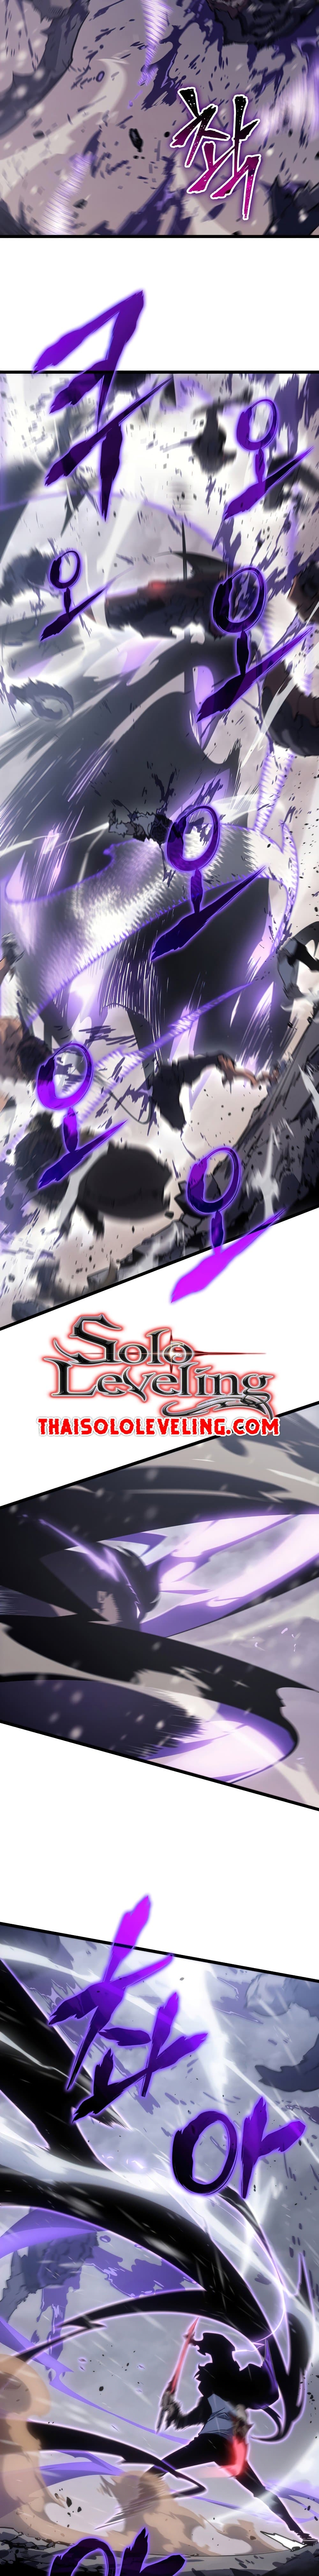 Solo Leveling 172 TH